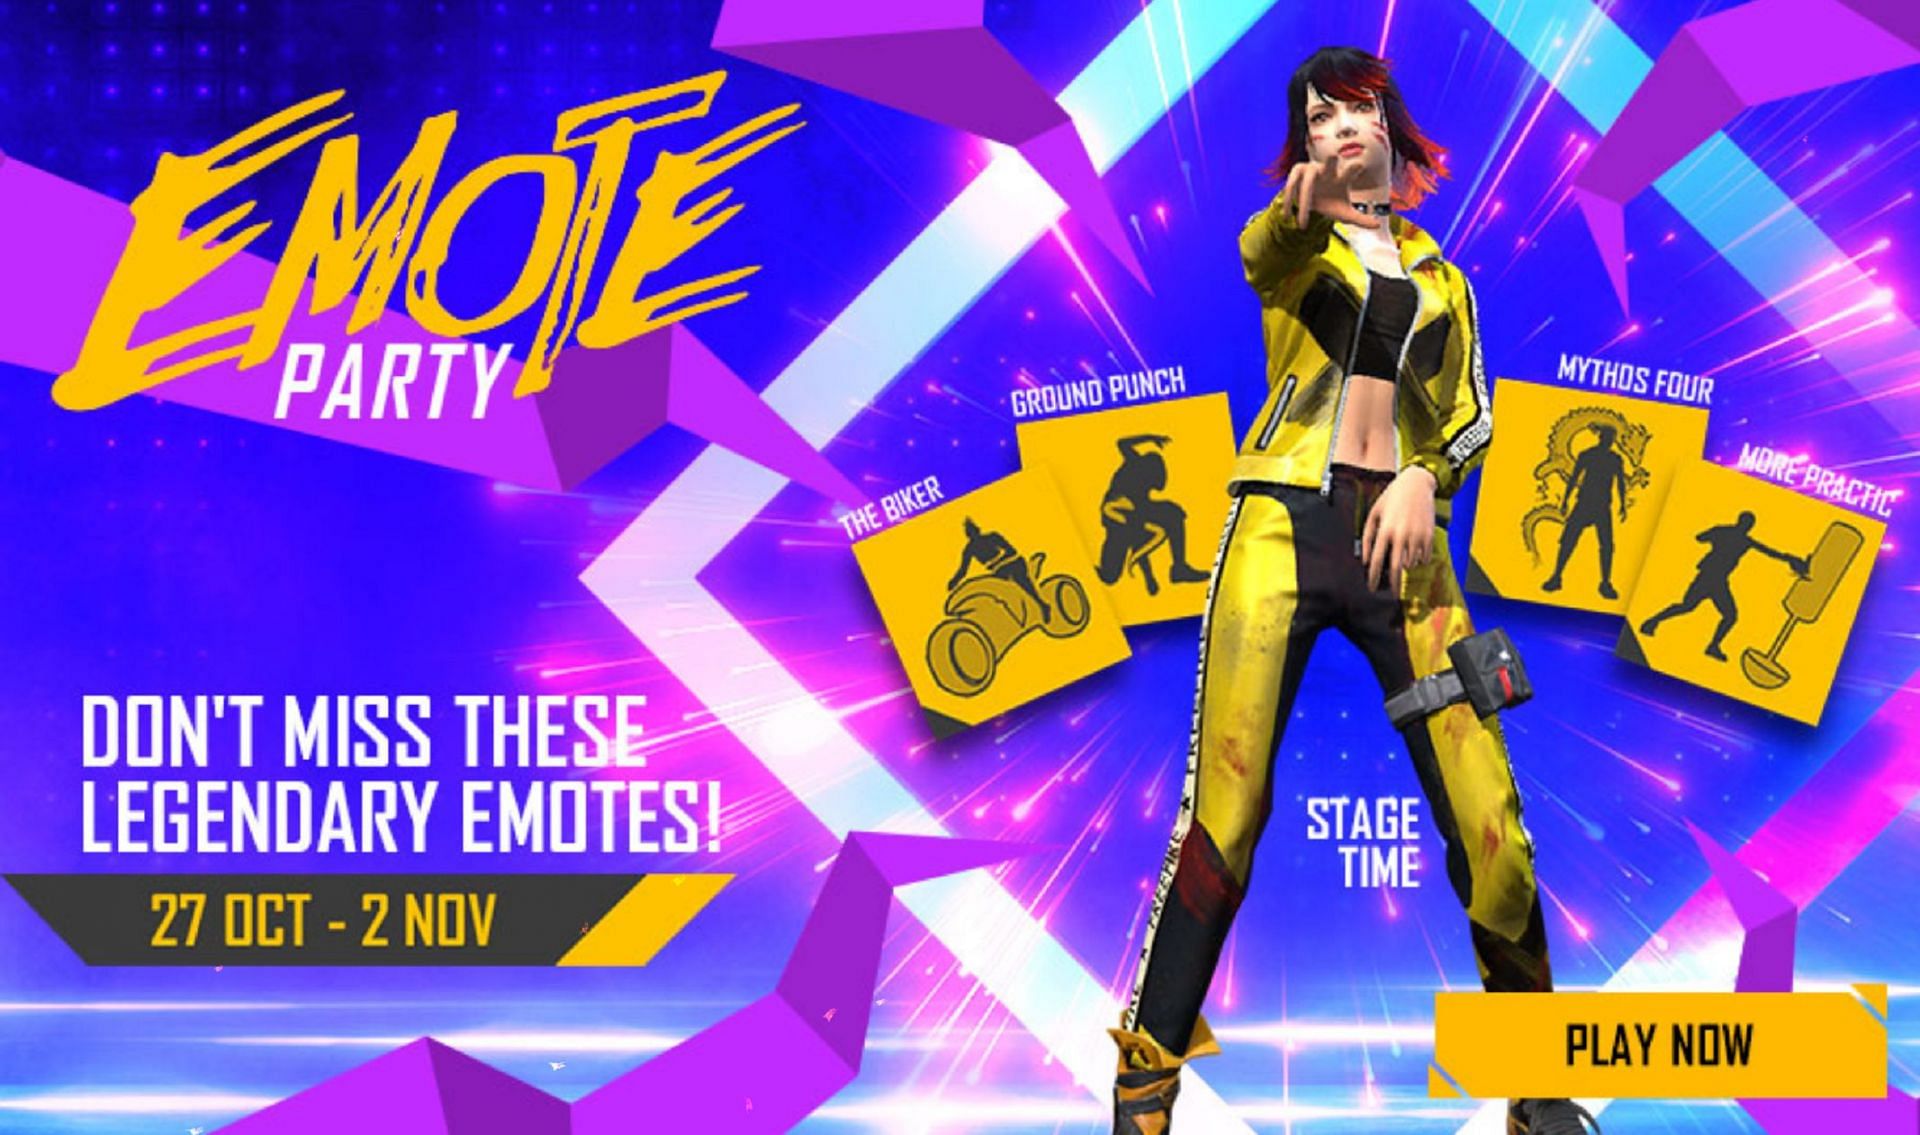 Emote Party event is now underway in Free Fire (Image via Free Fire)